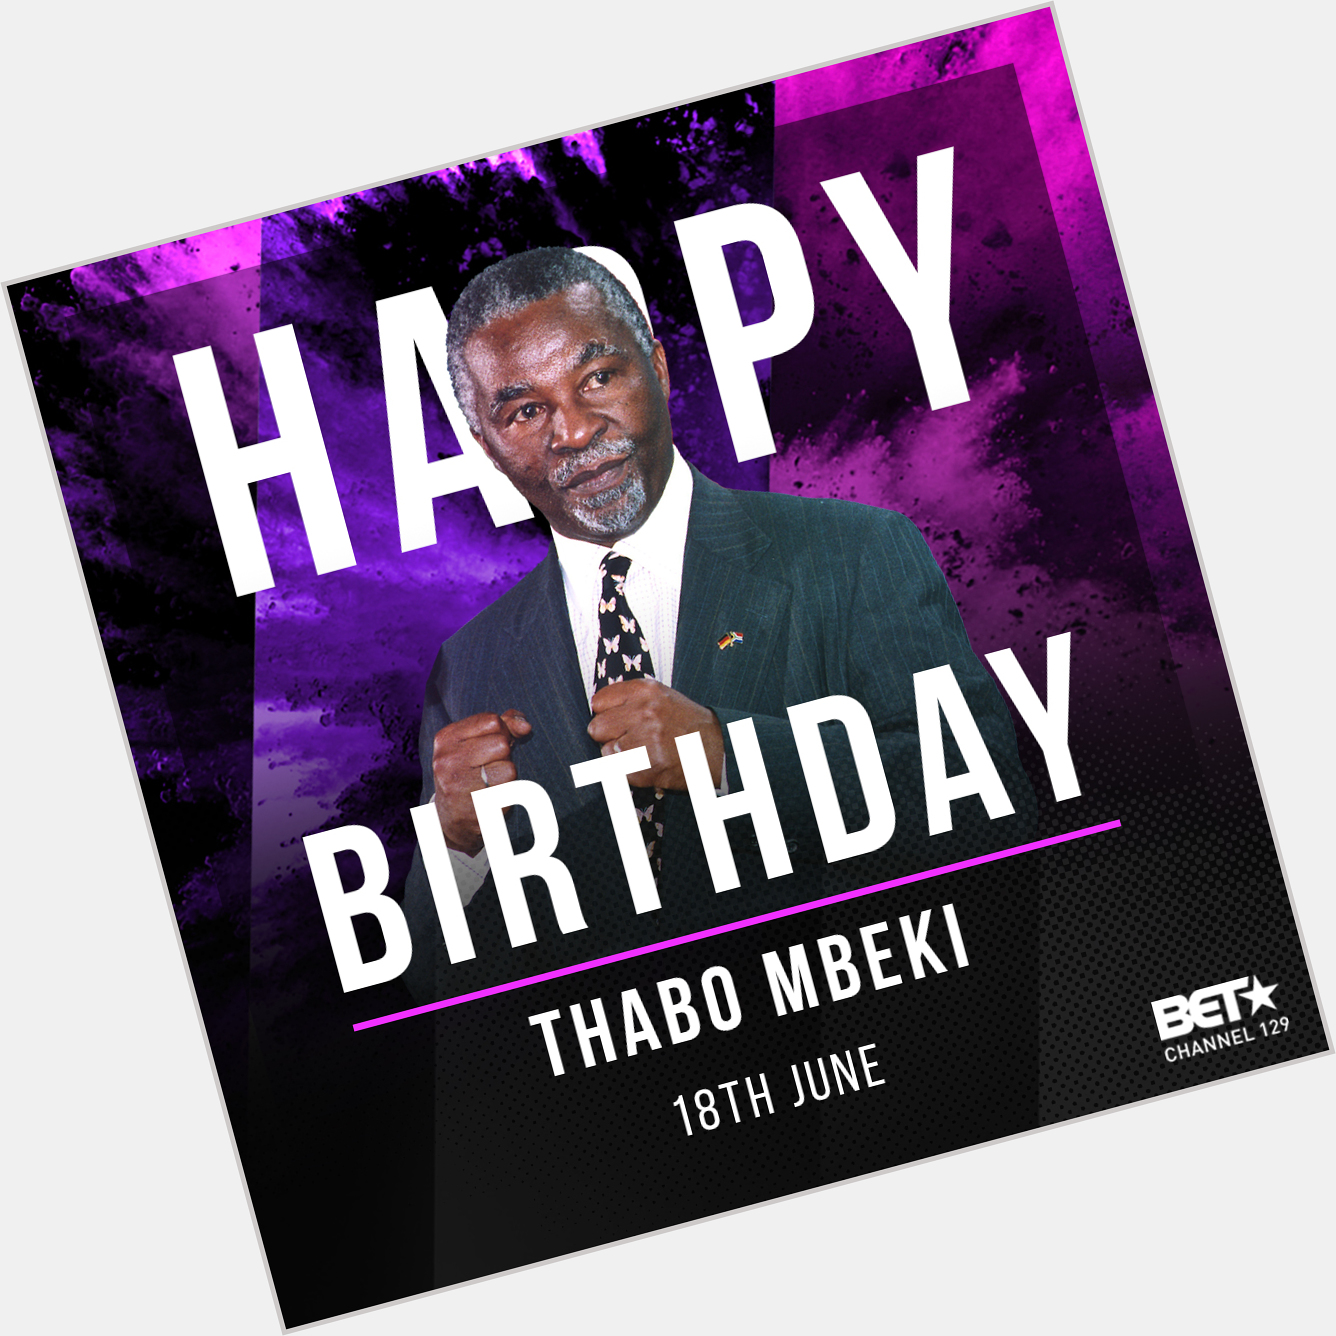 Happy birthday to politician Thabo Mbeki, who served as president of South Africa (1999 2008)   